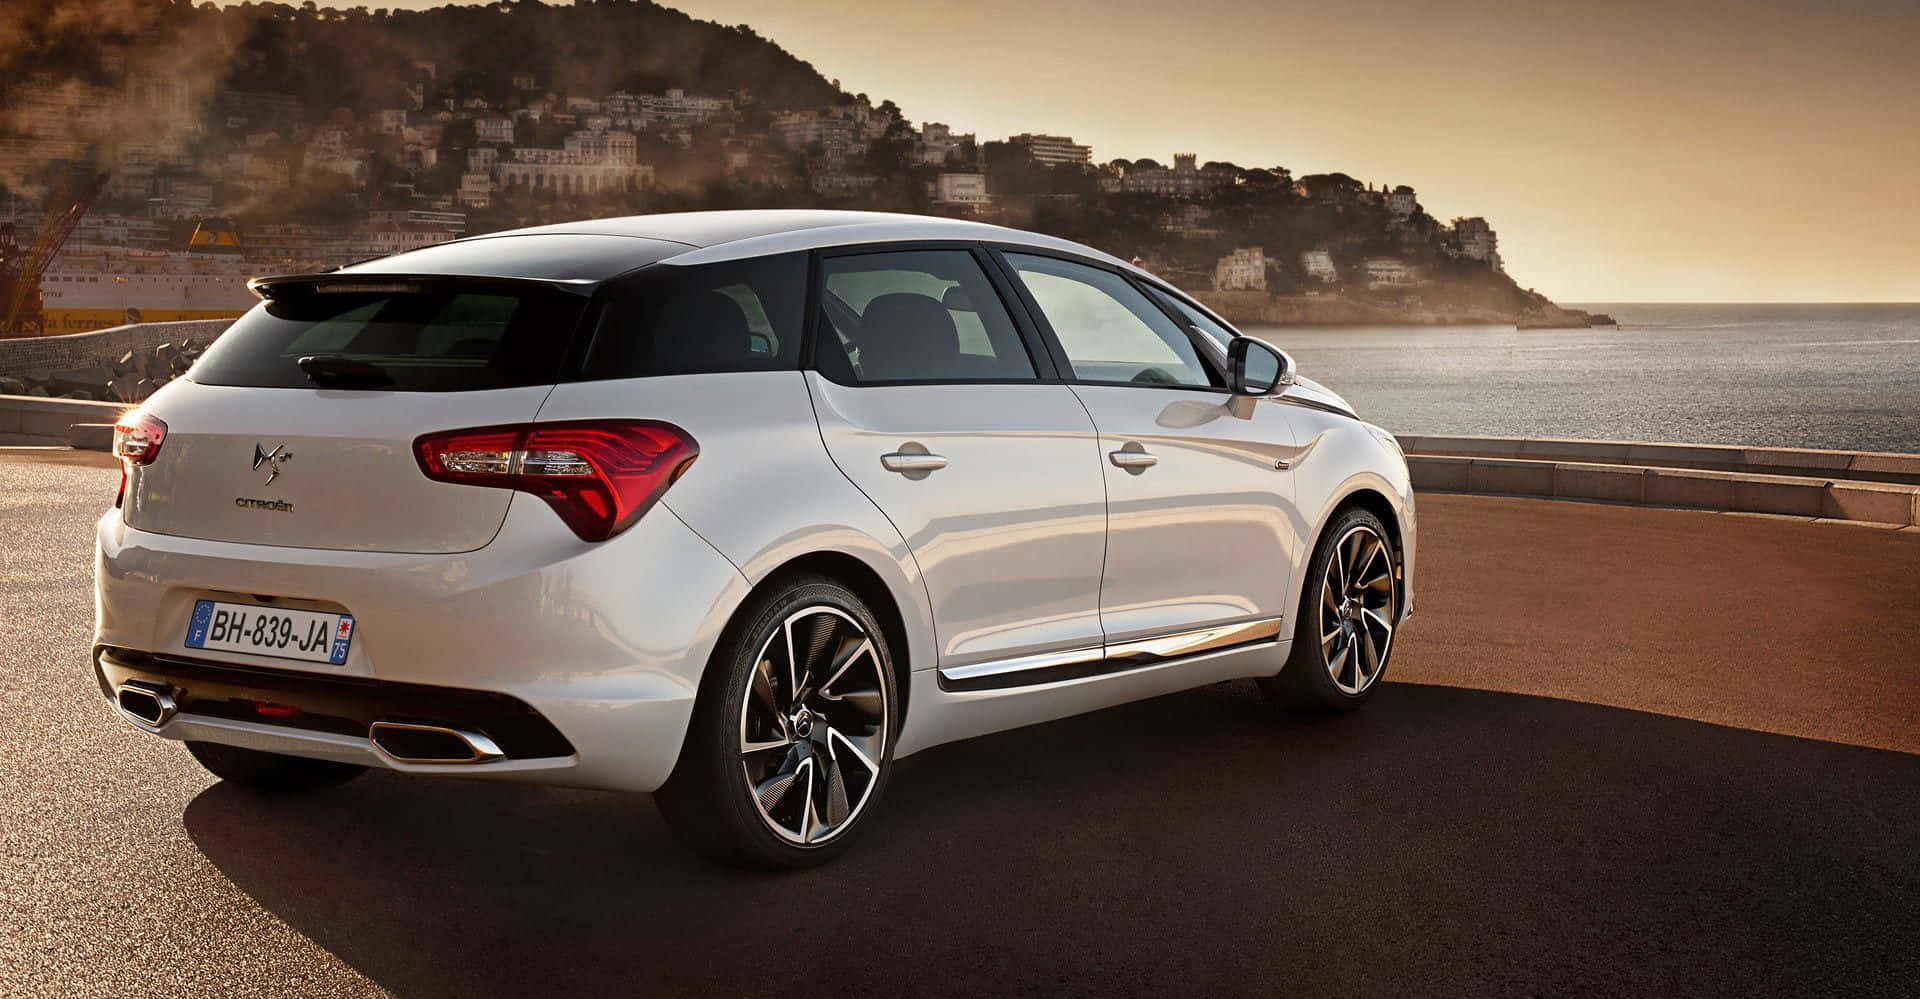 Sophisticated Citroen Ds5 - A Class Of Its Own Wallpaper